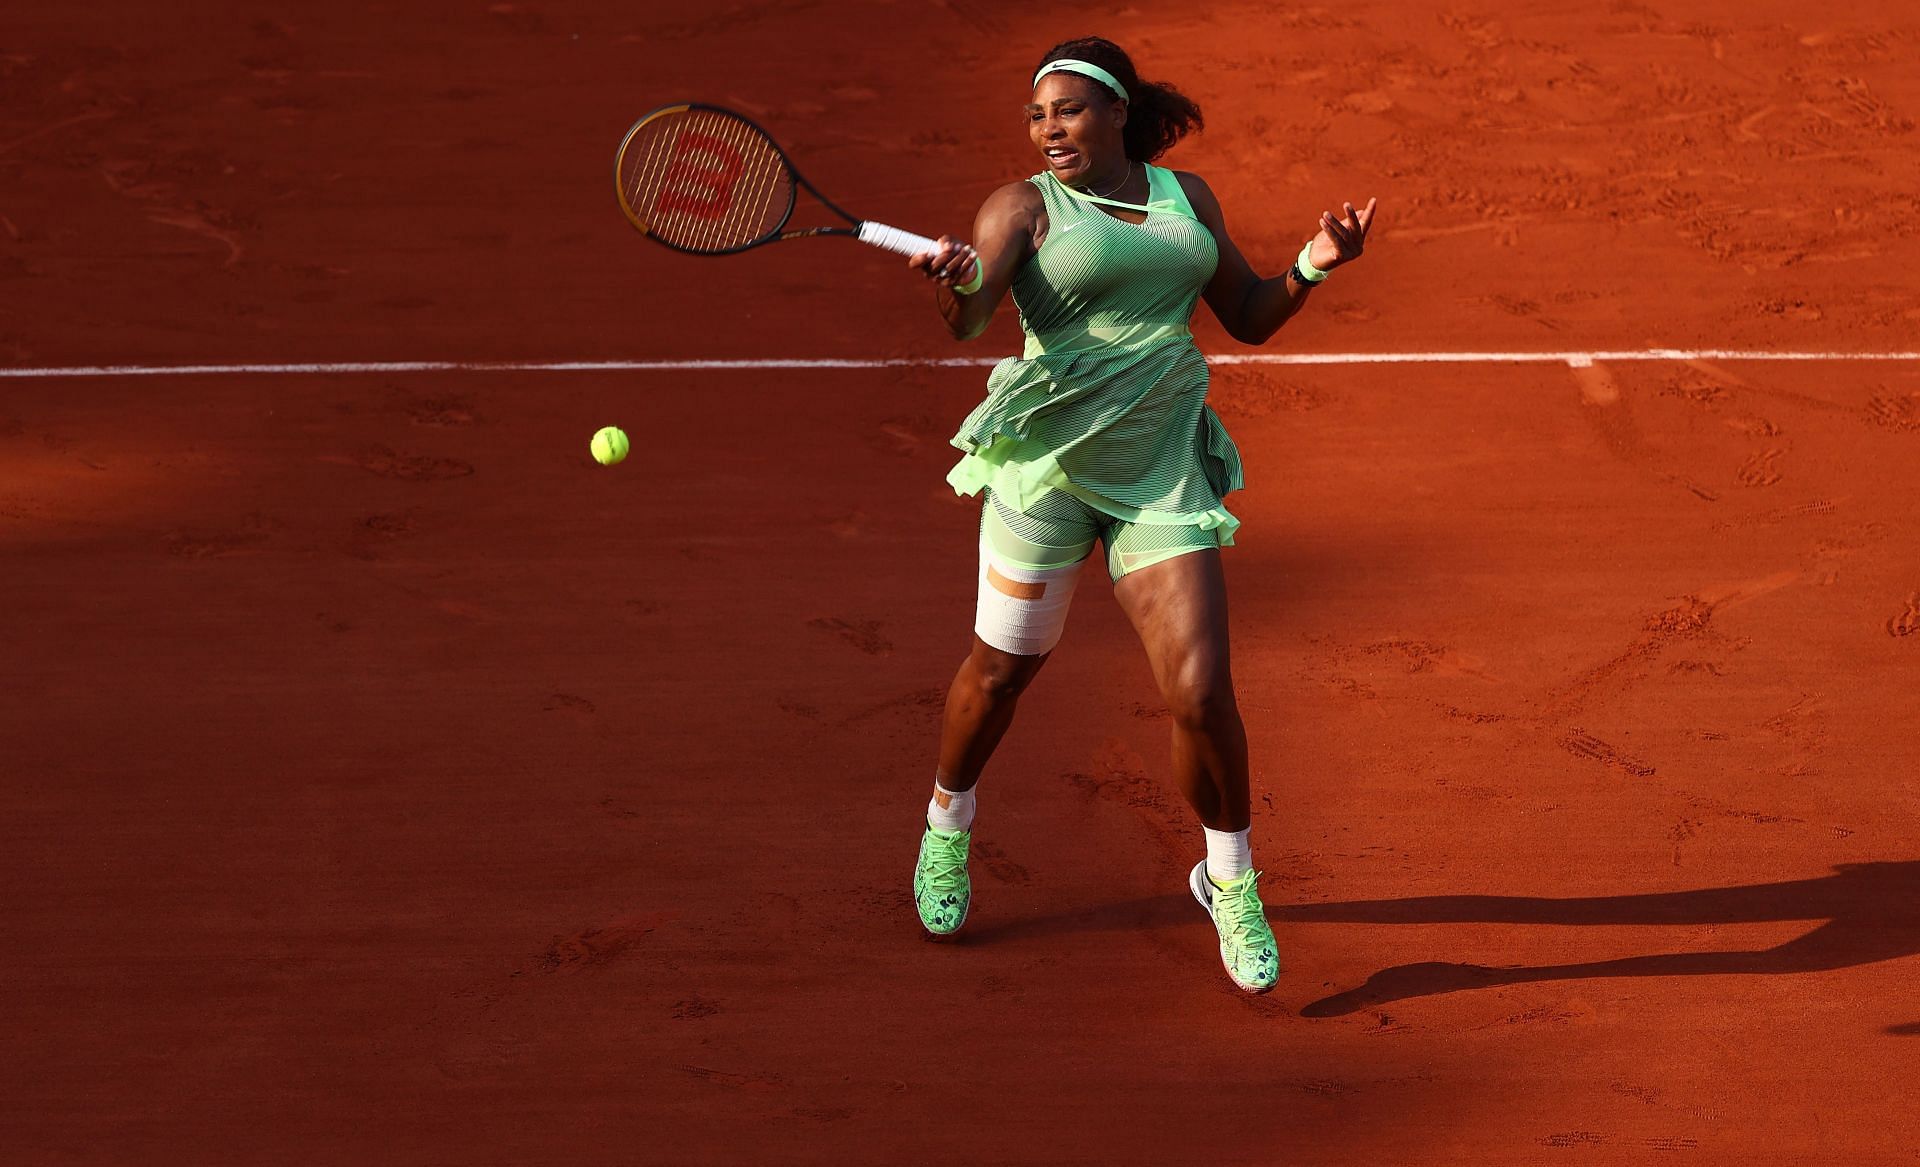 Serena Williams hits a forehand during her match with Elena Rybakina at the 2021 French Open